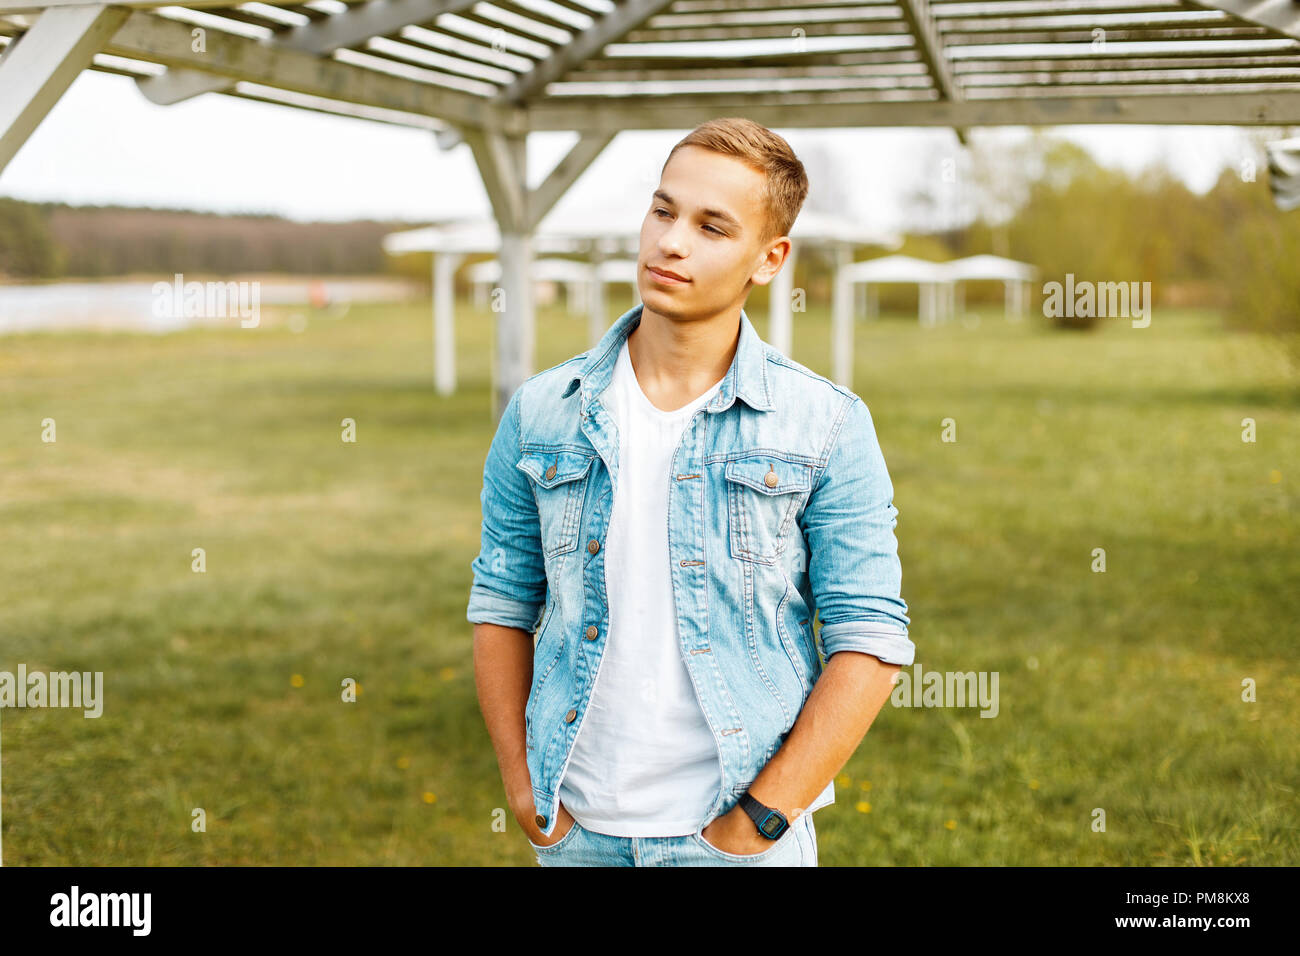 Natural portrait of a young man in a denim jacket and a white shirt near the white wooden canopy Stock Photo